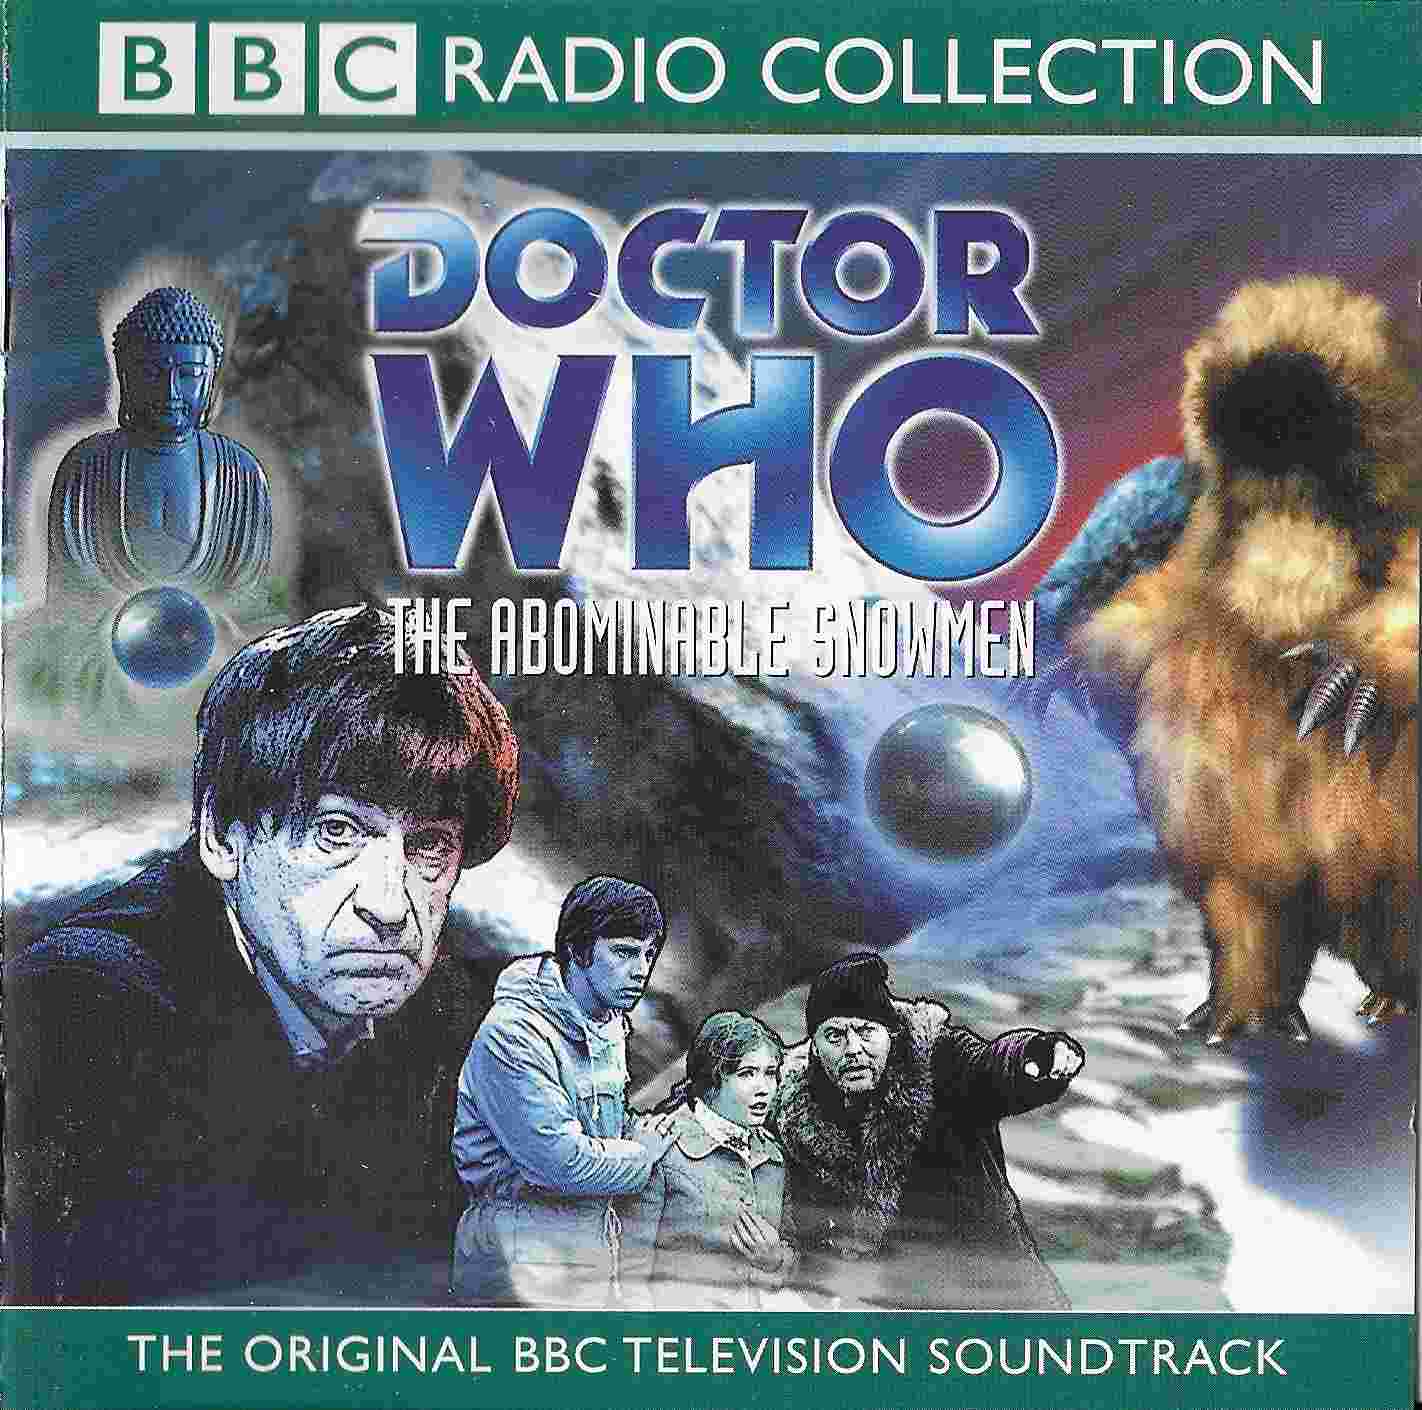 Picture of Doctor Who - The abominable snowmen by artist Mervyn Haisman / Henry Lincoln from the BBC cds - Records and Tapes library